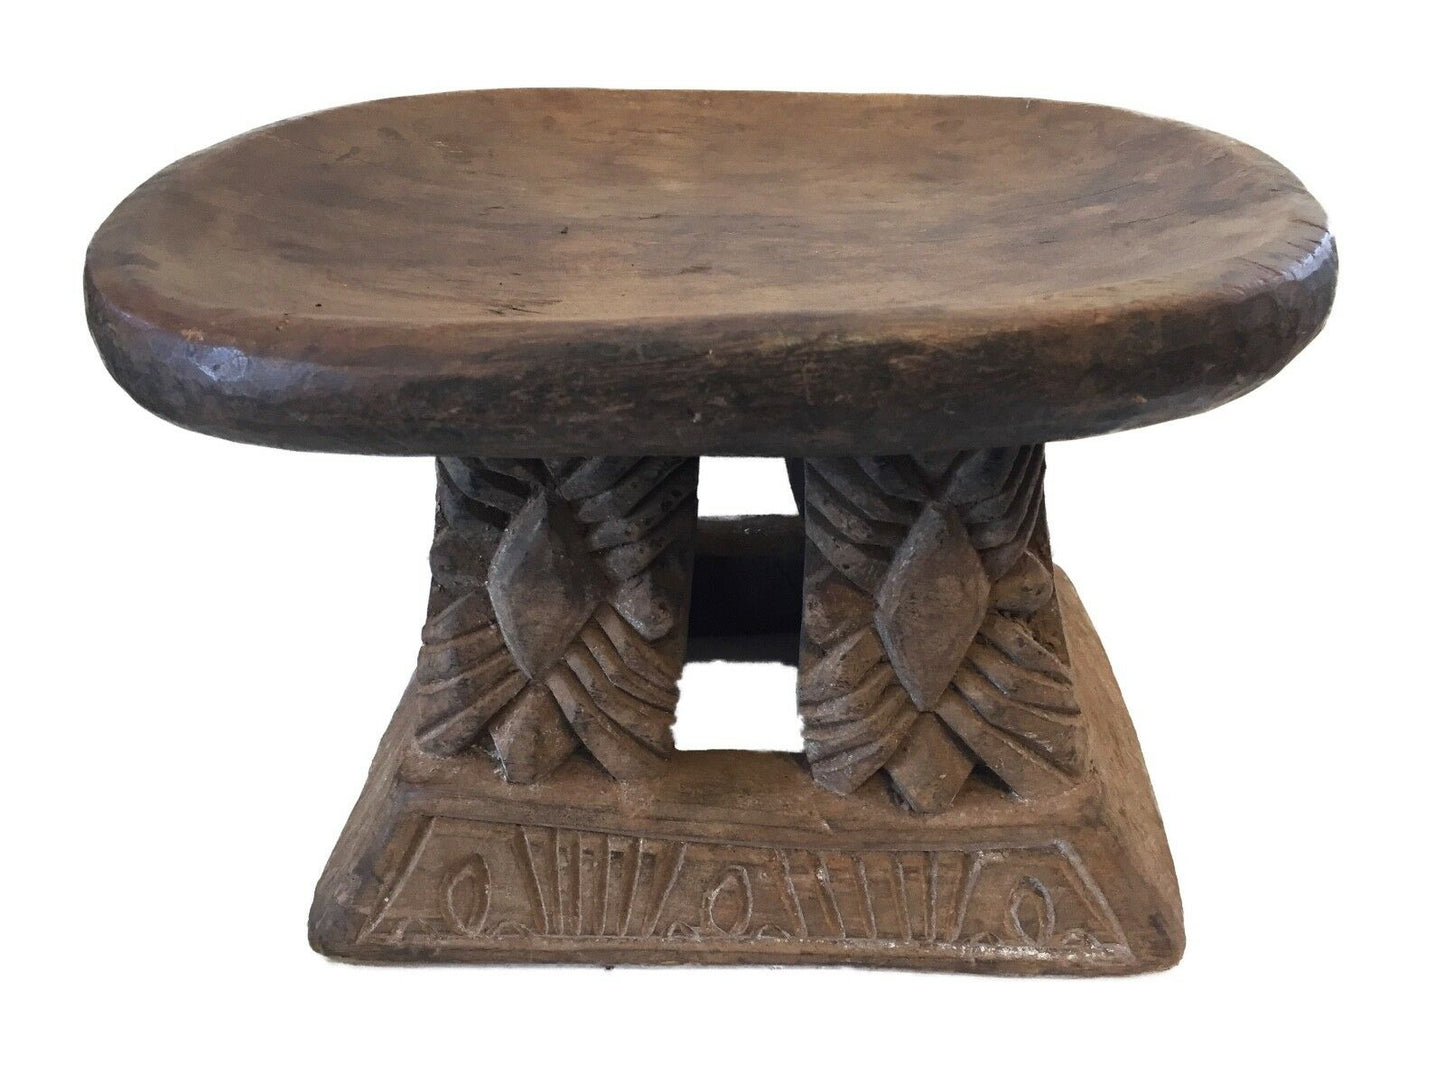 #782 African Bamileke Low  Milk Stool Cameroon 14." w by 9.25" h